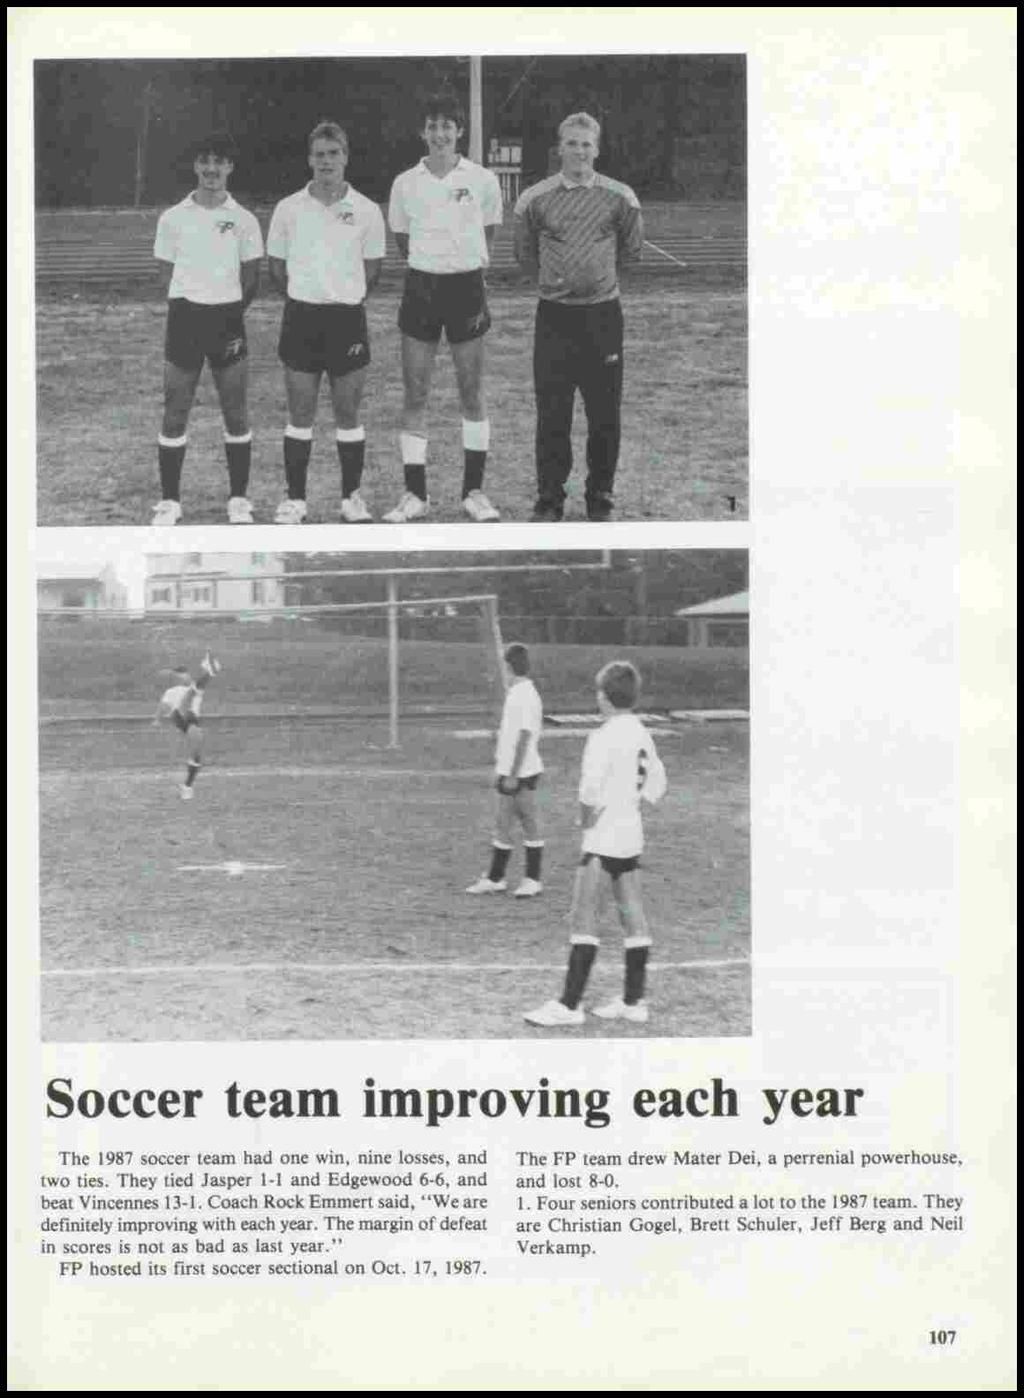 Soccer team improving each year The 1987 soccer team had one win, nine losses, and two ties. They tied Jasper 1-1 and Edgewood 6-6, and beat Vincennes 13-1.